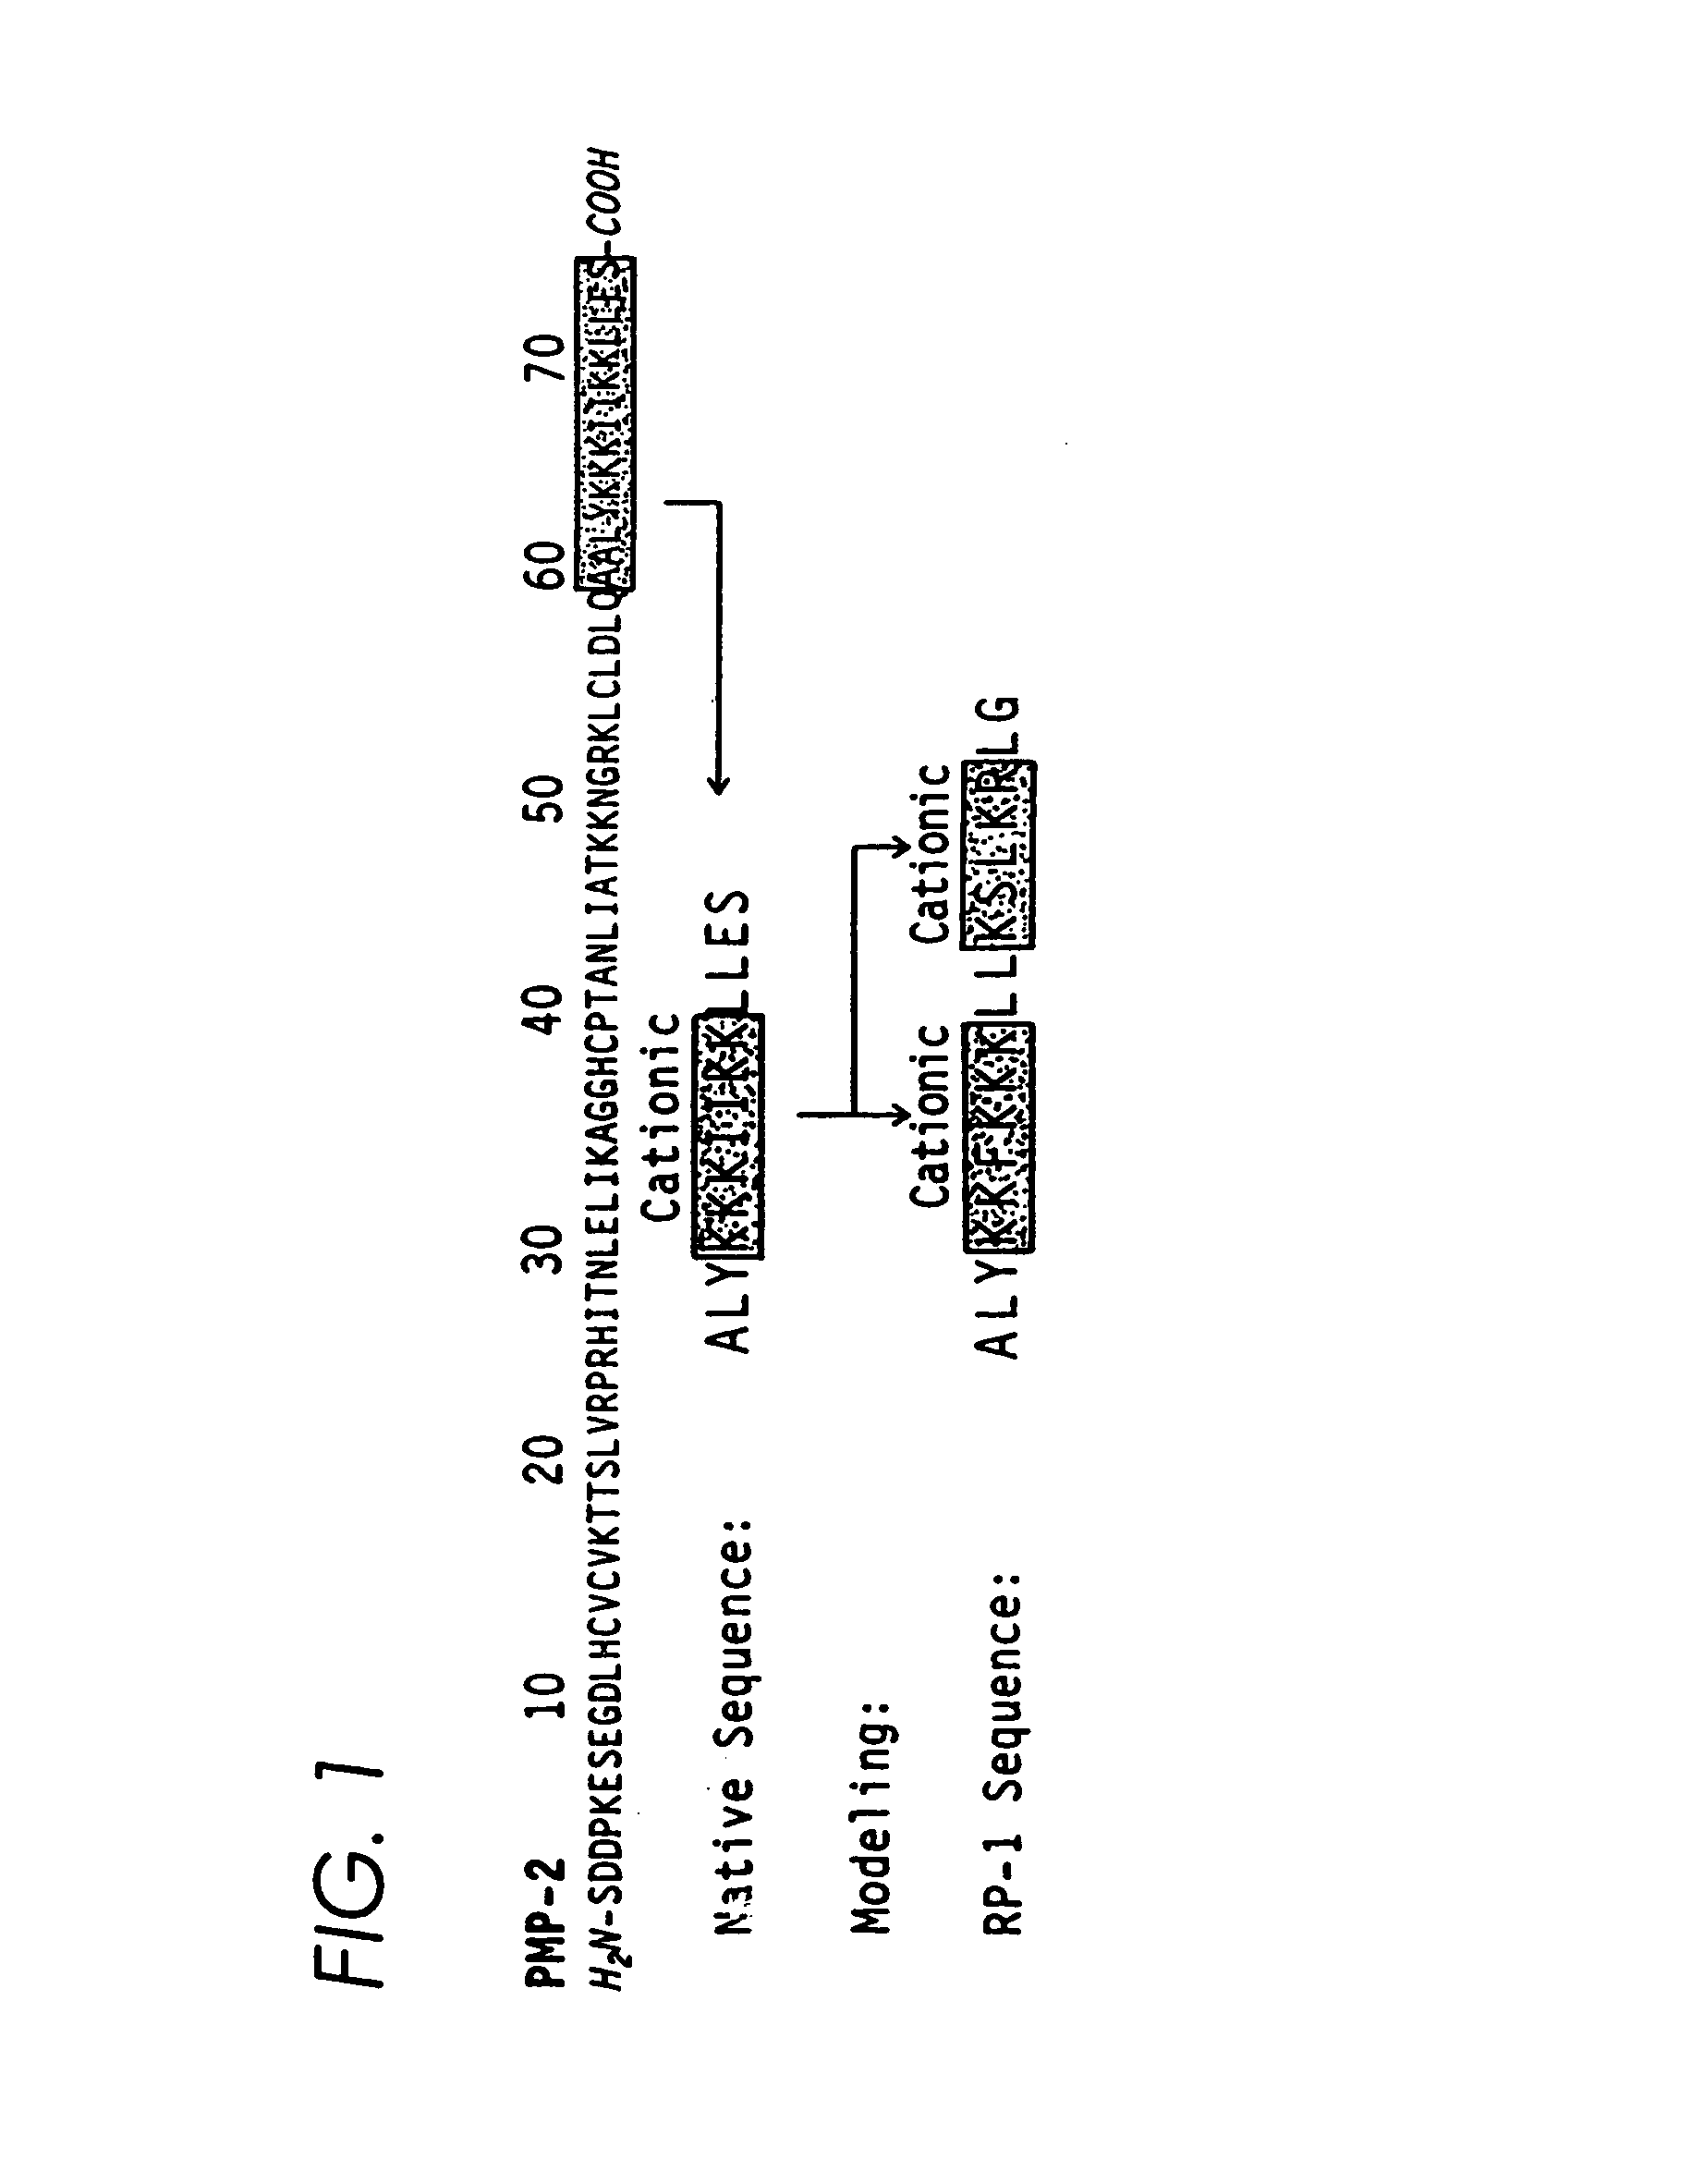 Antimicrobial peptides and derived metapeptides